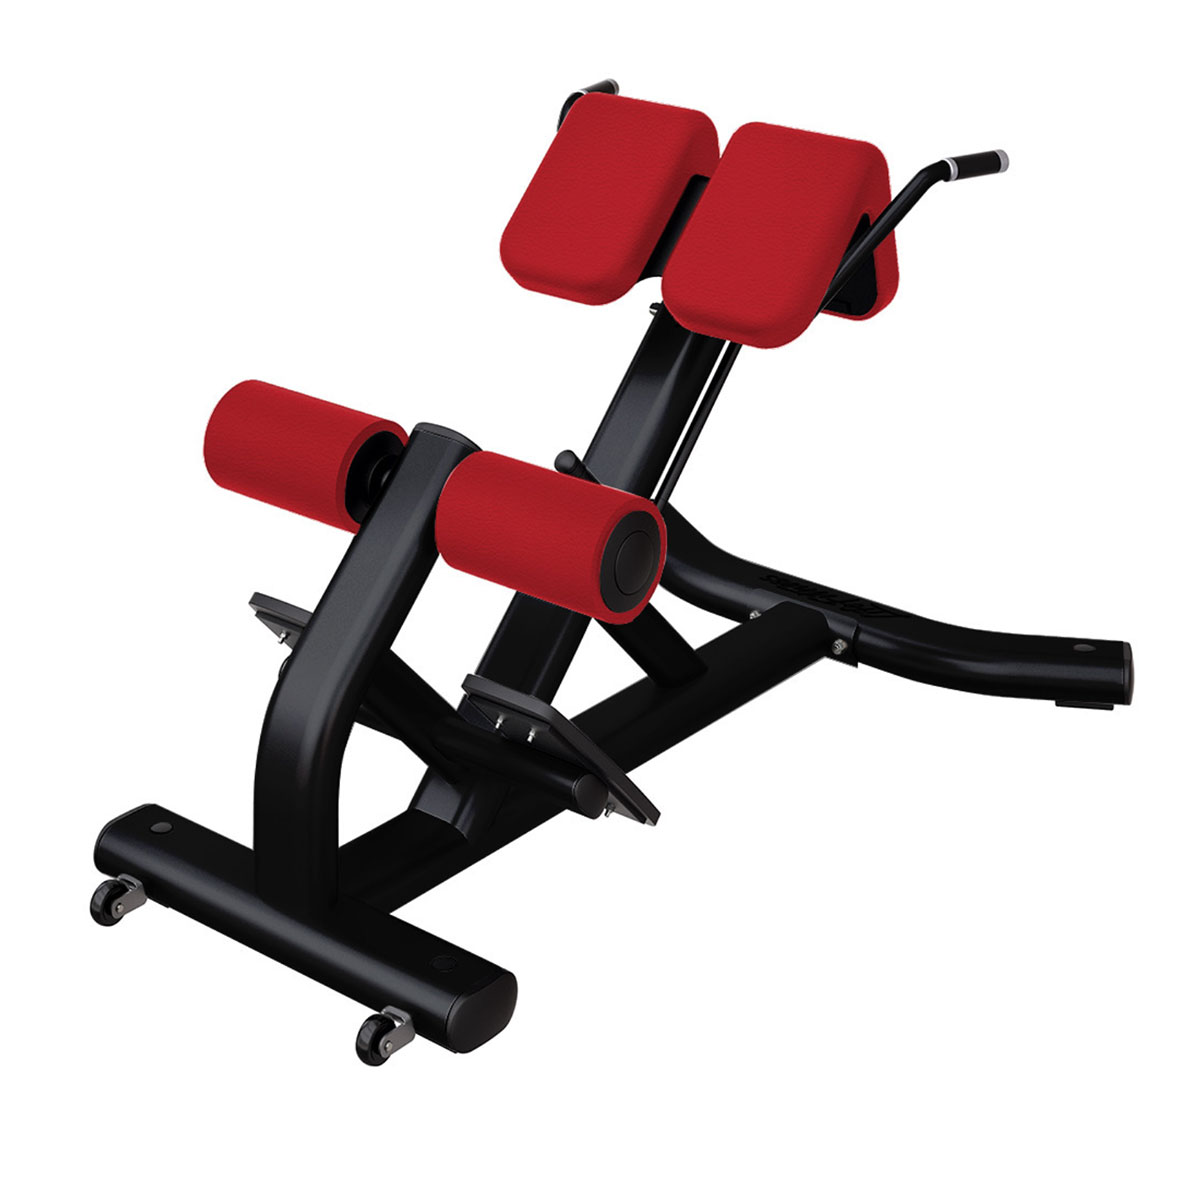 https://www.usedgymequipment.com/wp-content/uploads/2019/03/Life-Fitness-Signature-Series-Back-Extension-45-Degree-Hyperextension.jpg